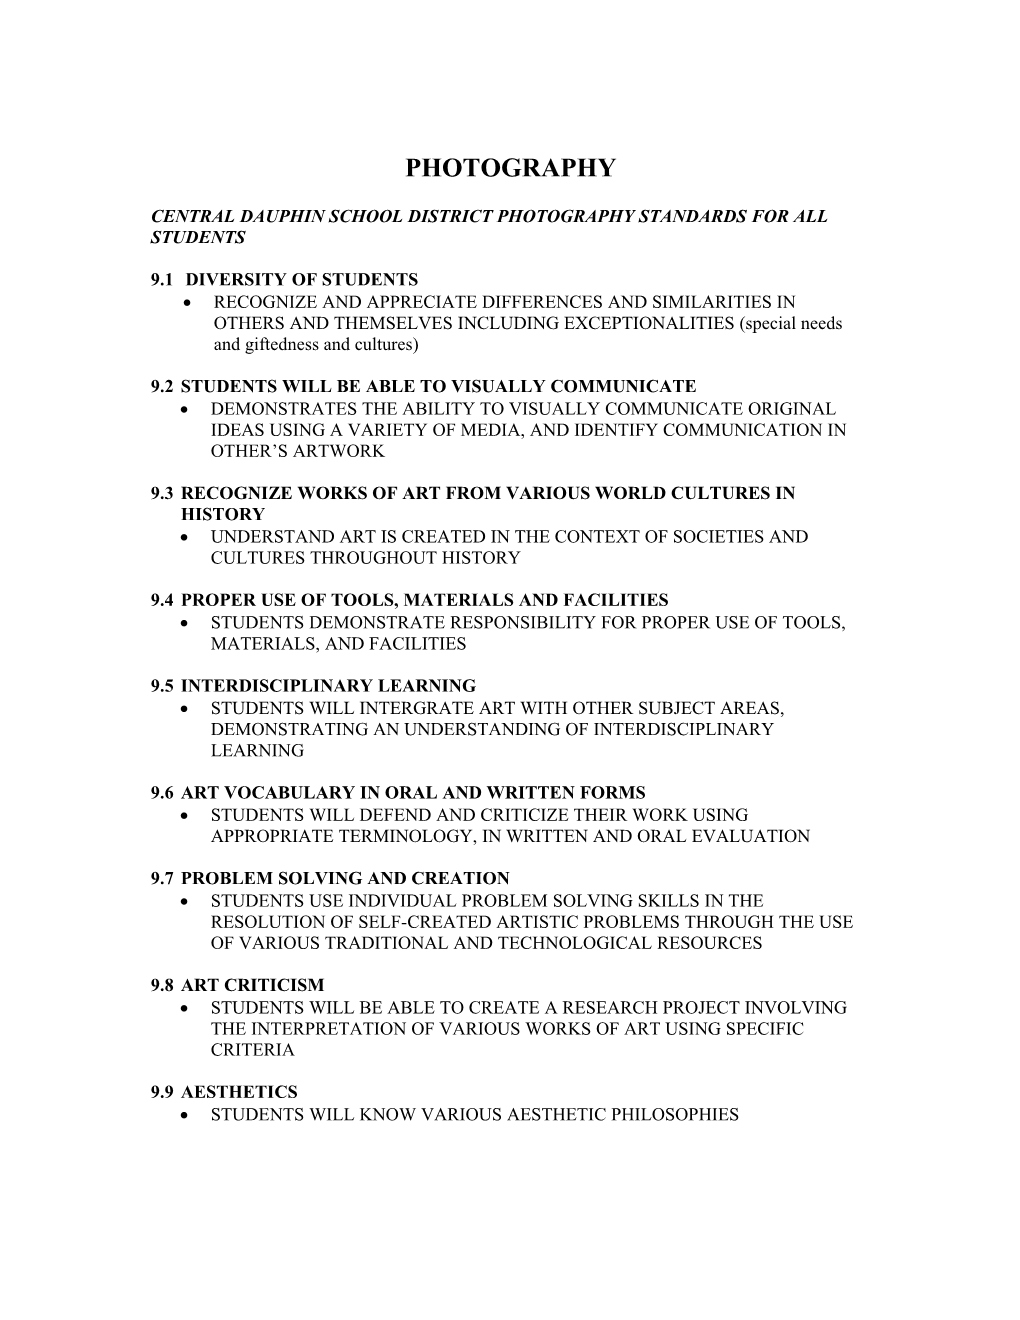 Central Dauphin School District Photography Standards for All Students